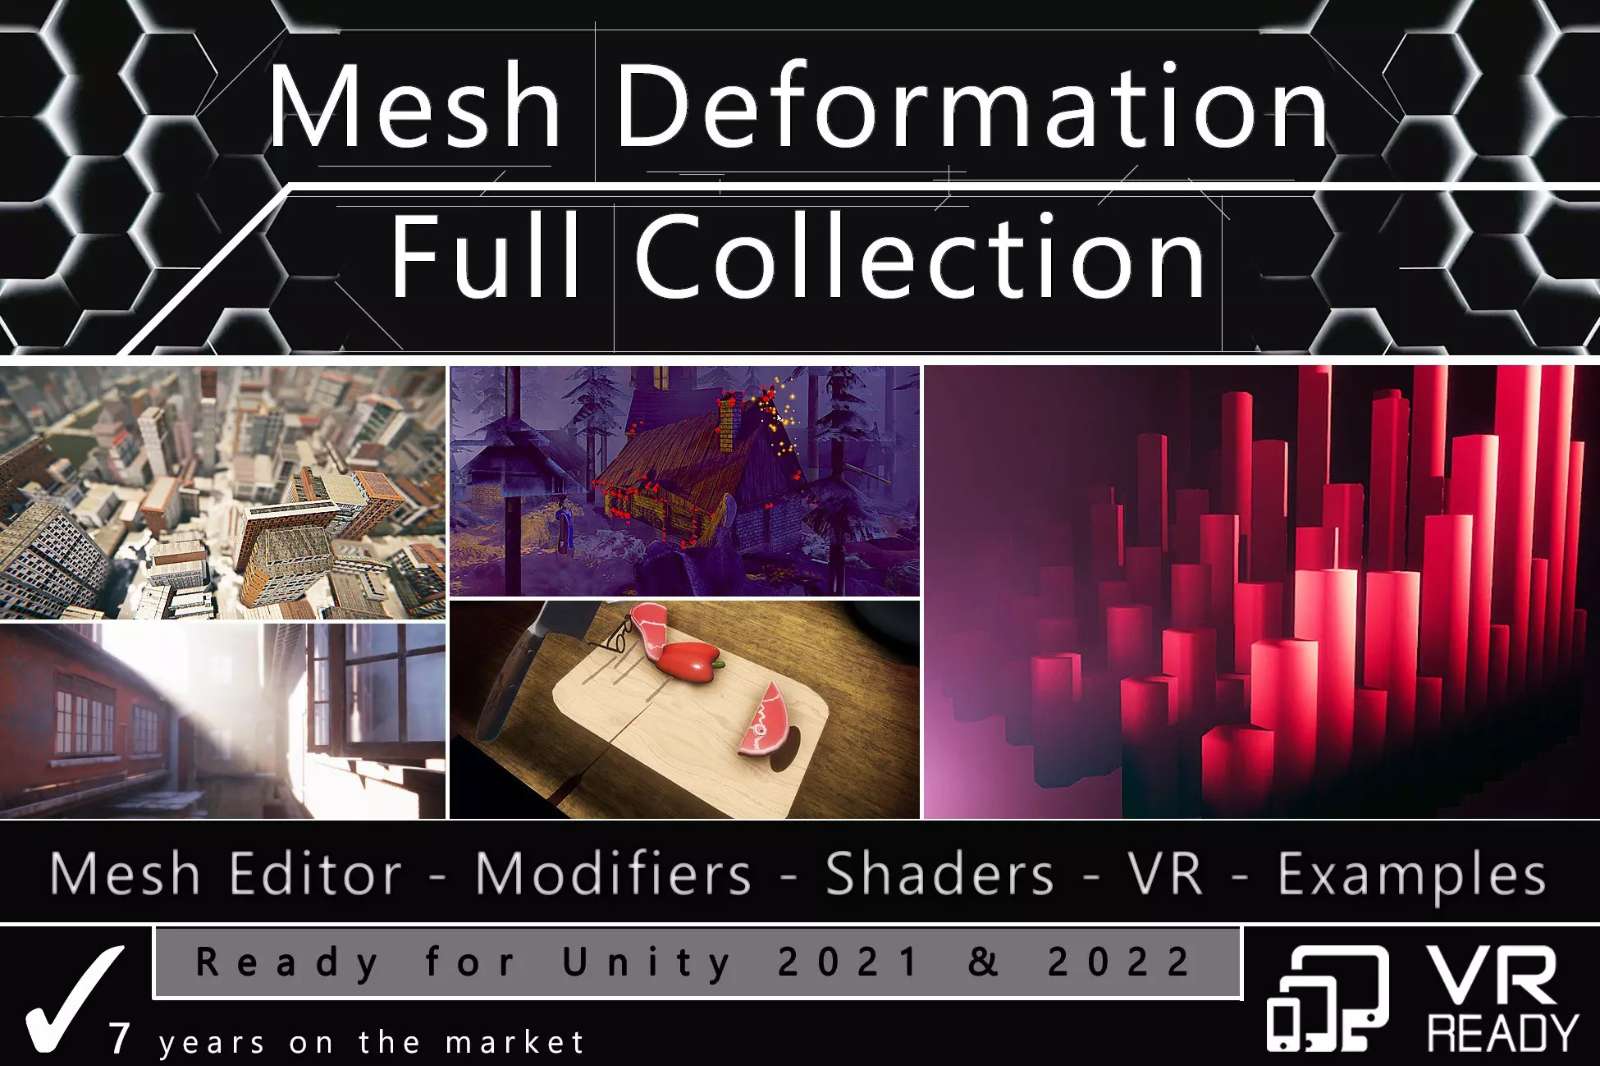 Mesh Deformation Full Collection 16.0.0